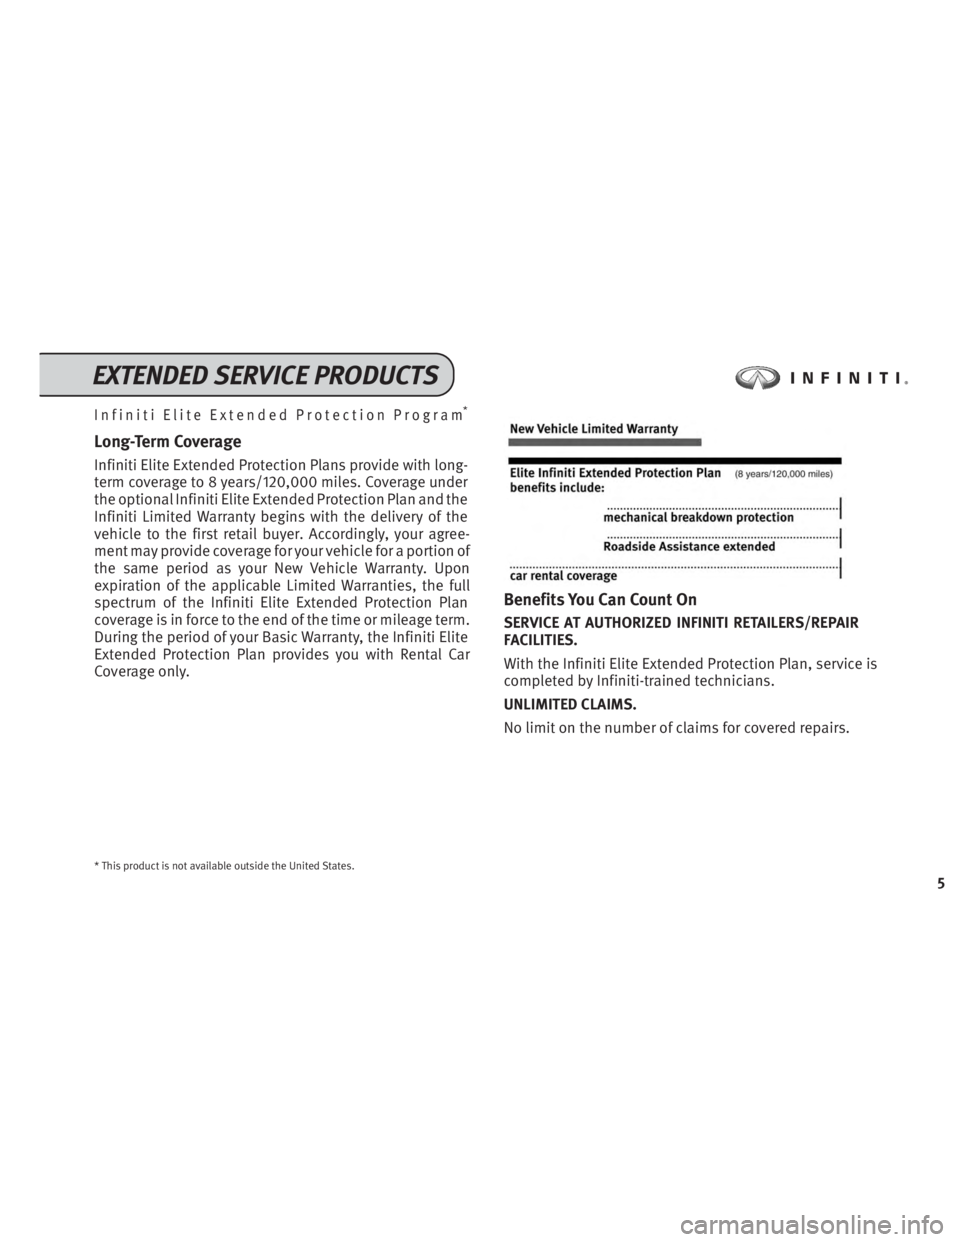 INFINITI QX60 HYBRID 2014  Service And Maintenance Guide Infiniti Elite Extended Protection Program*
Long-Term Coverage
Infiniti Elite Extended Protection Plans provide with long-
term coverage to 8 years/120,000 miles. Coverage under
the optional Infiniti 